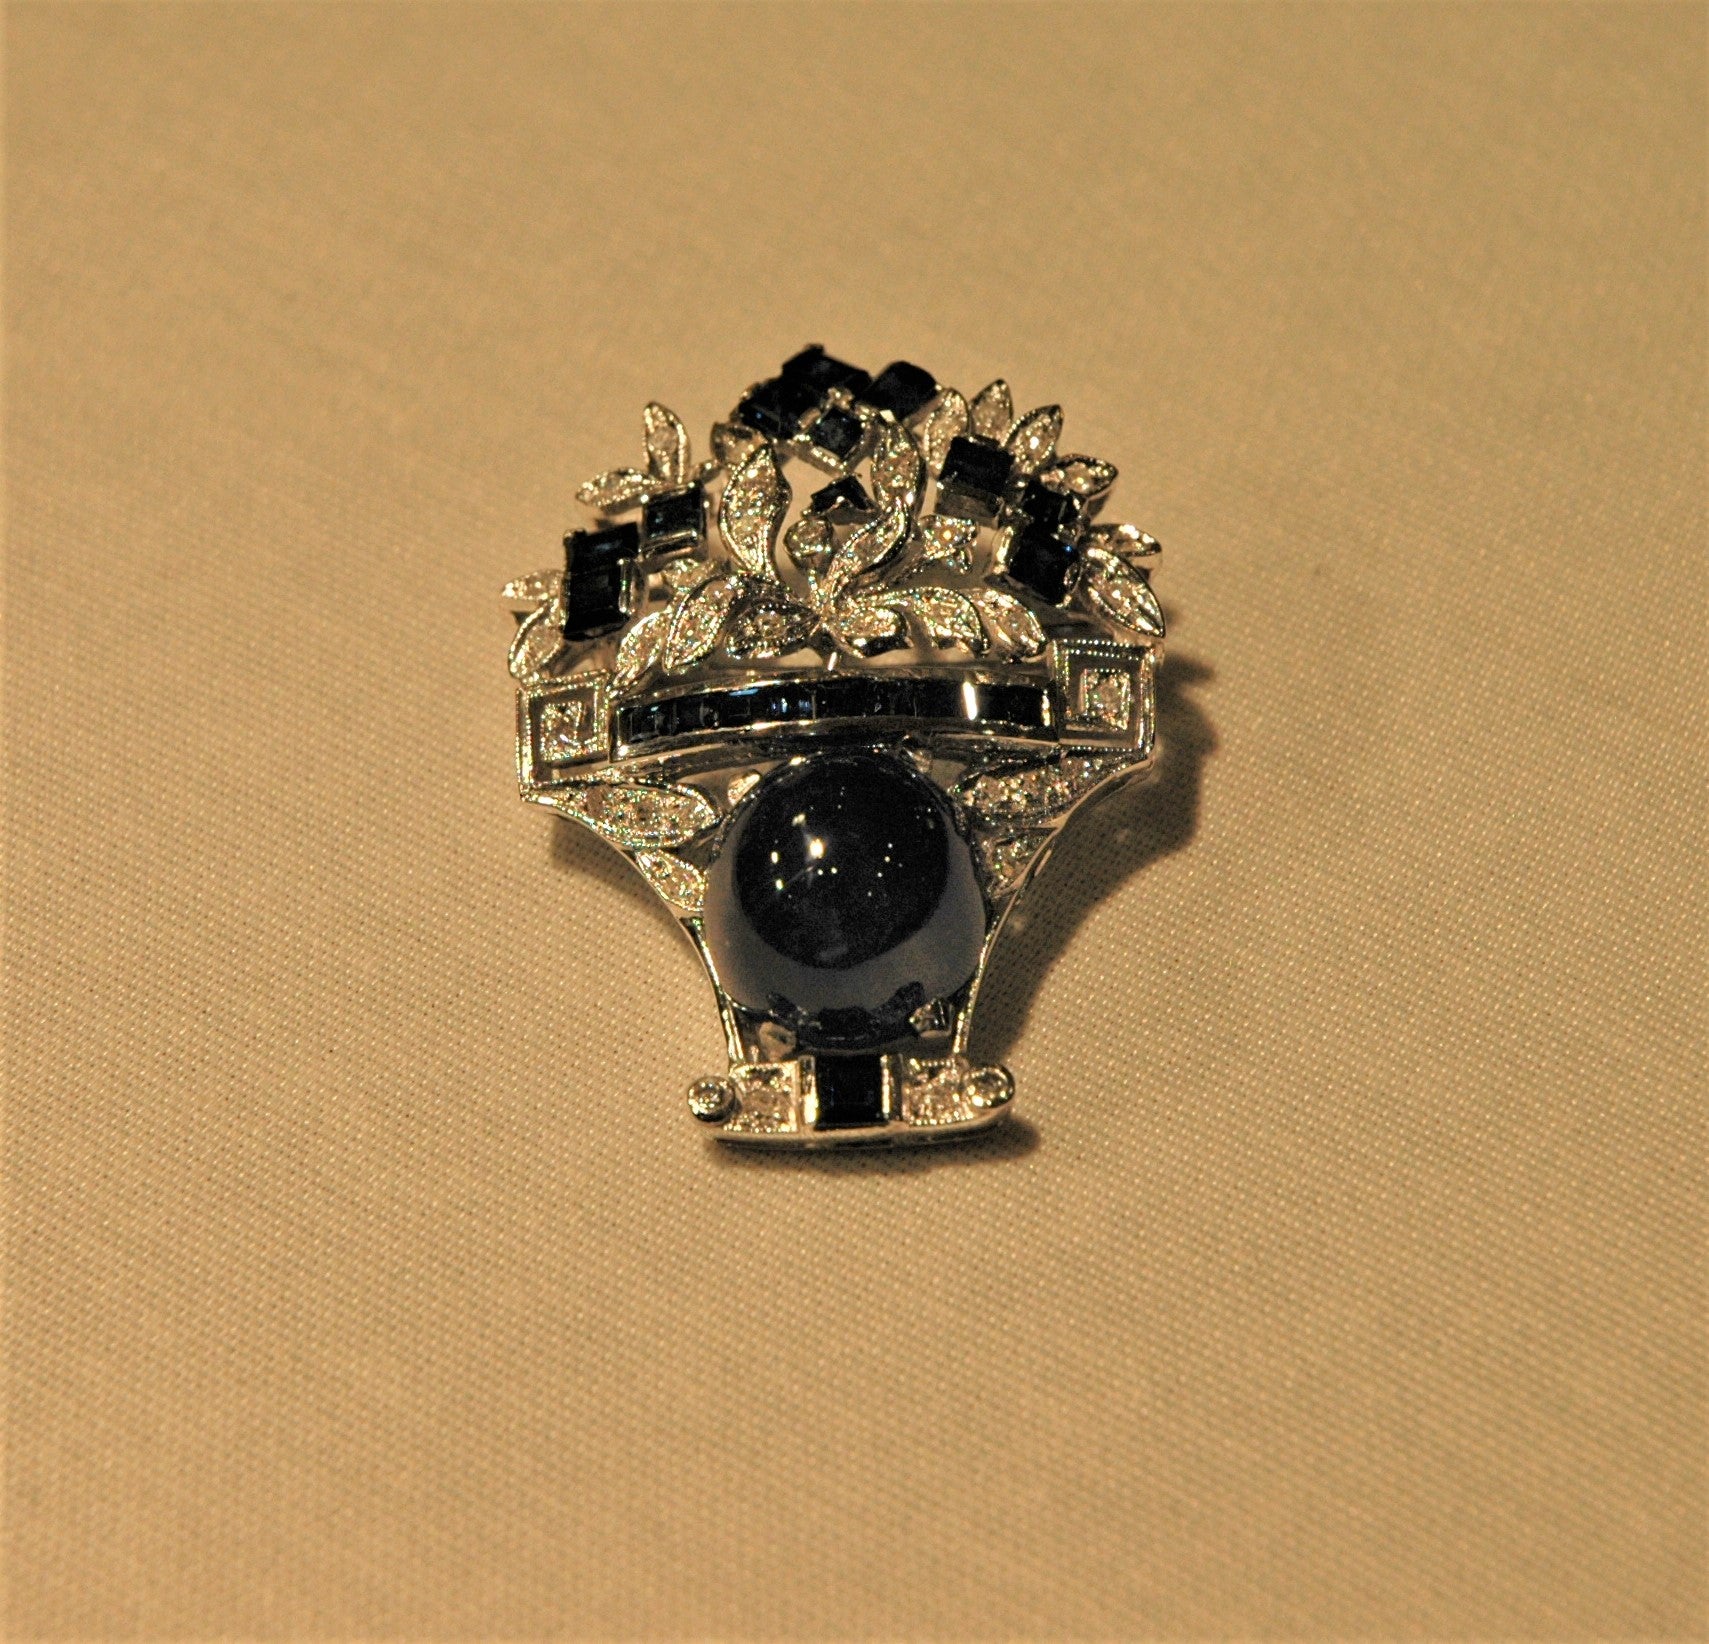 Beautiful basket brooch handmade in Italy with white gold, a central cabochon sapphire, diamonds and baguette-cut sapphires. The brooch may be used also as a pendant, letting a thin chain pass through the holes in the back frame of the brooch.